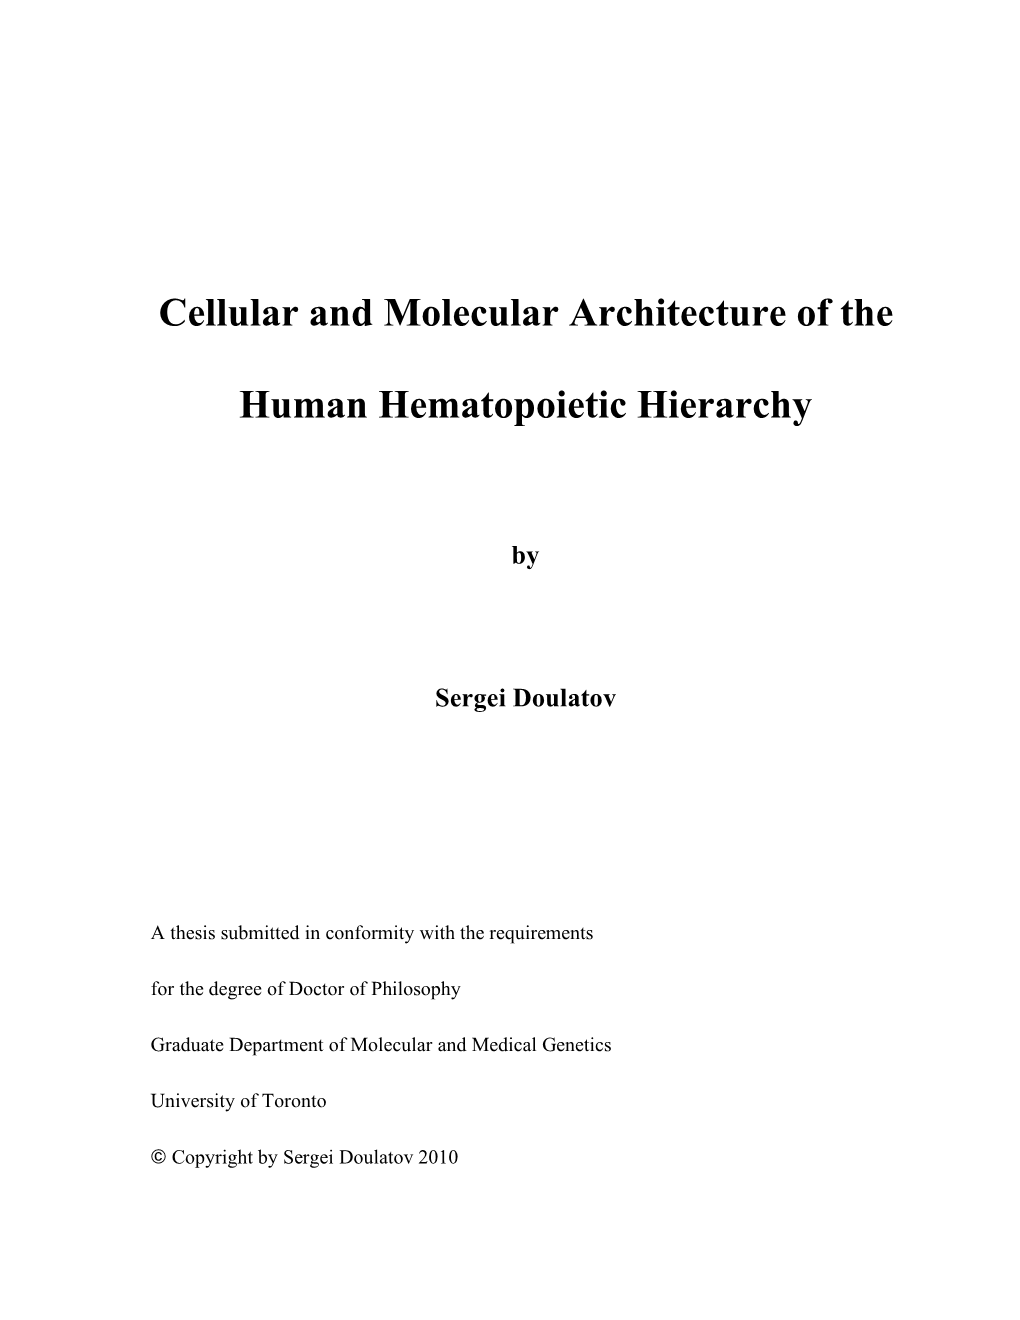 Cellular and Molecular Architecture of the Human Hematopoietic Hierarchy